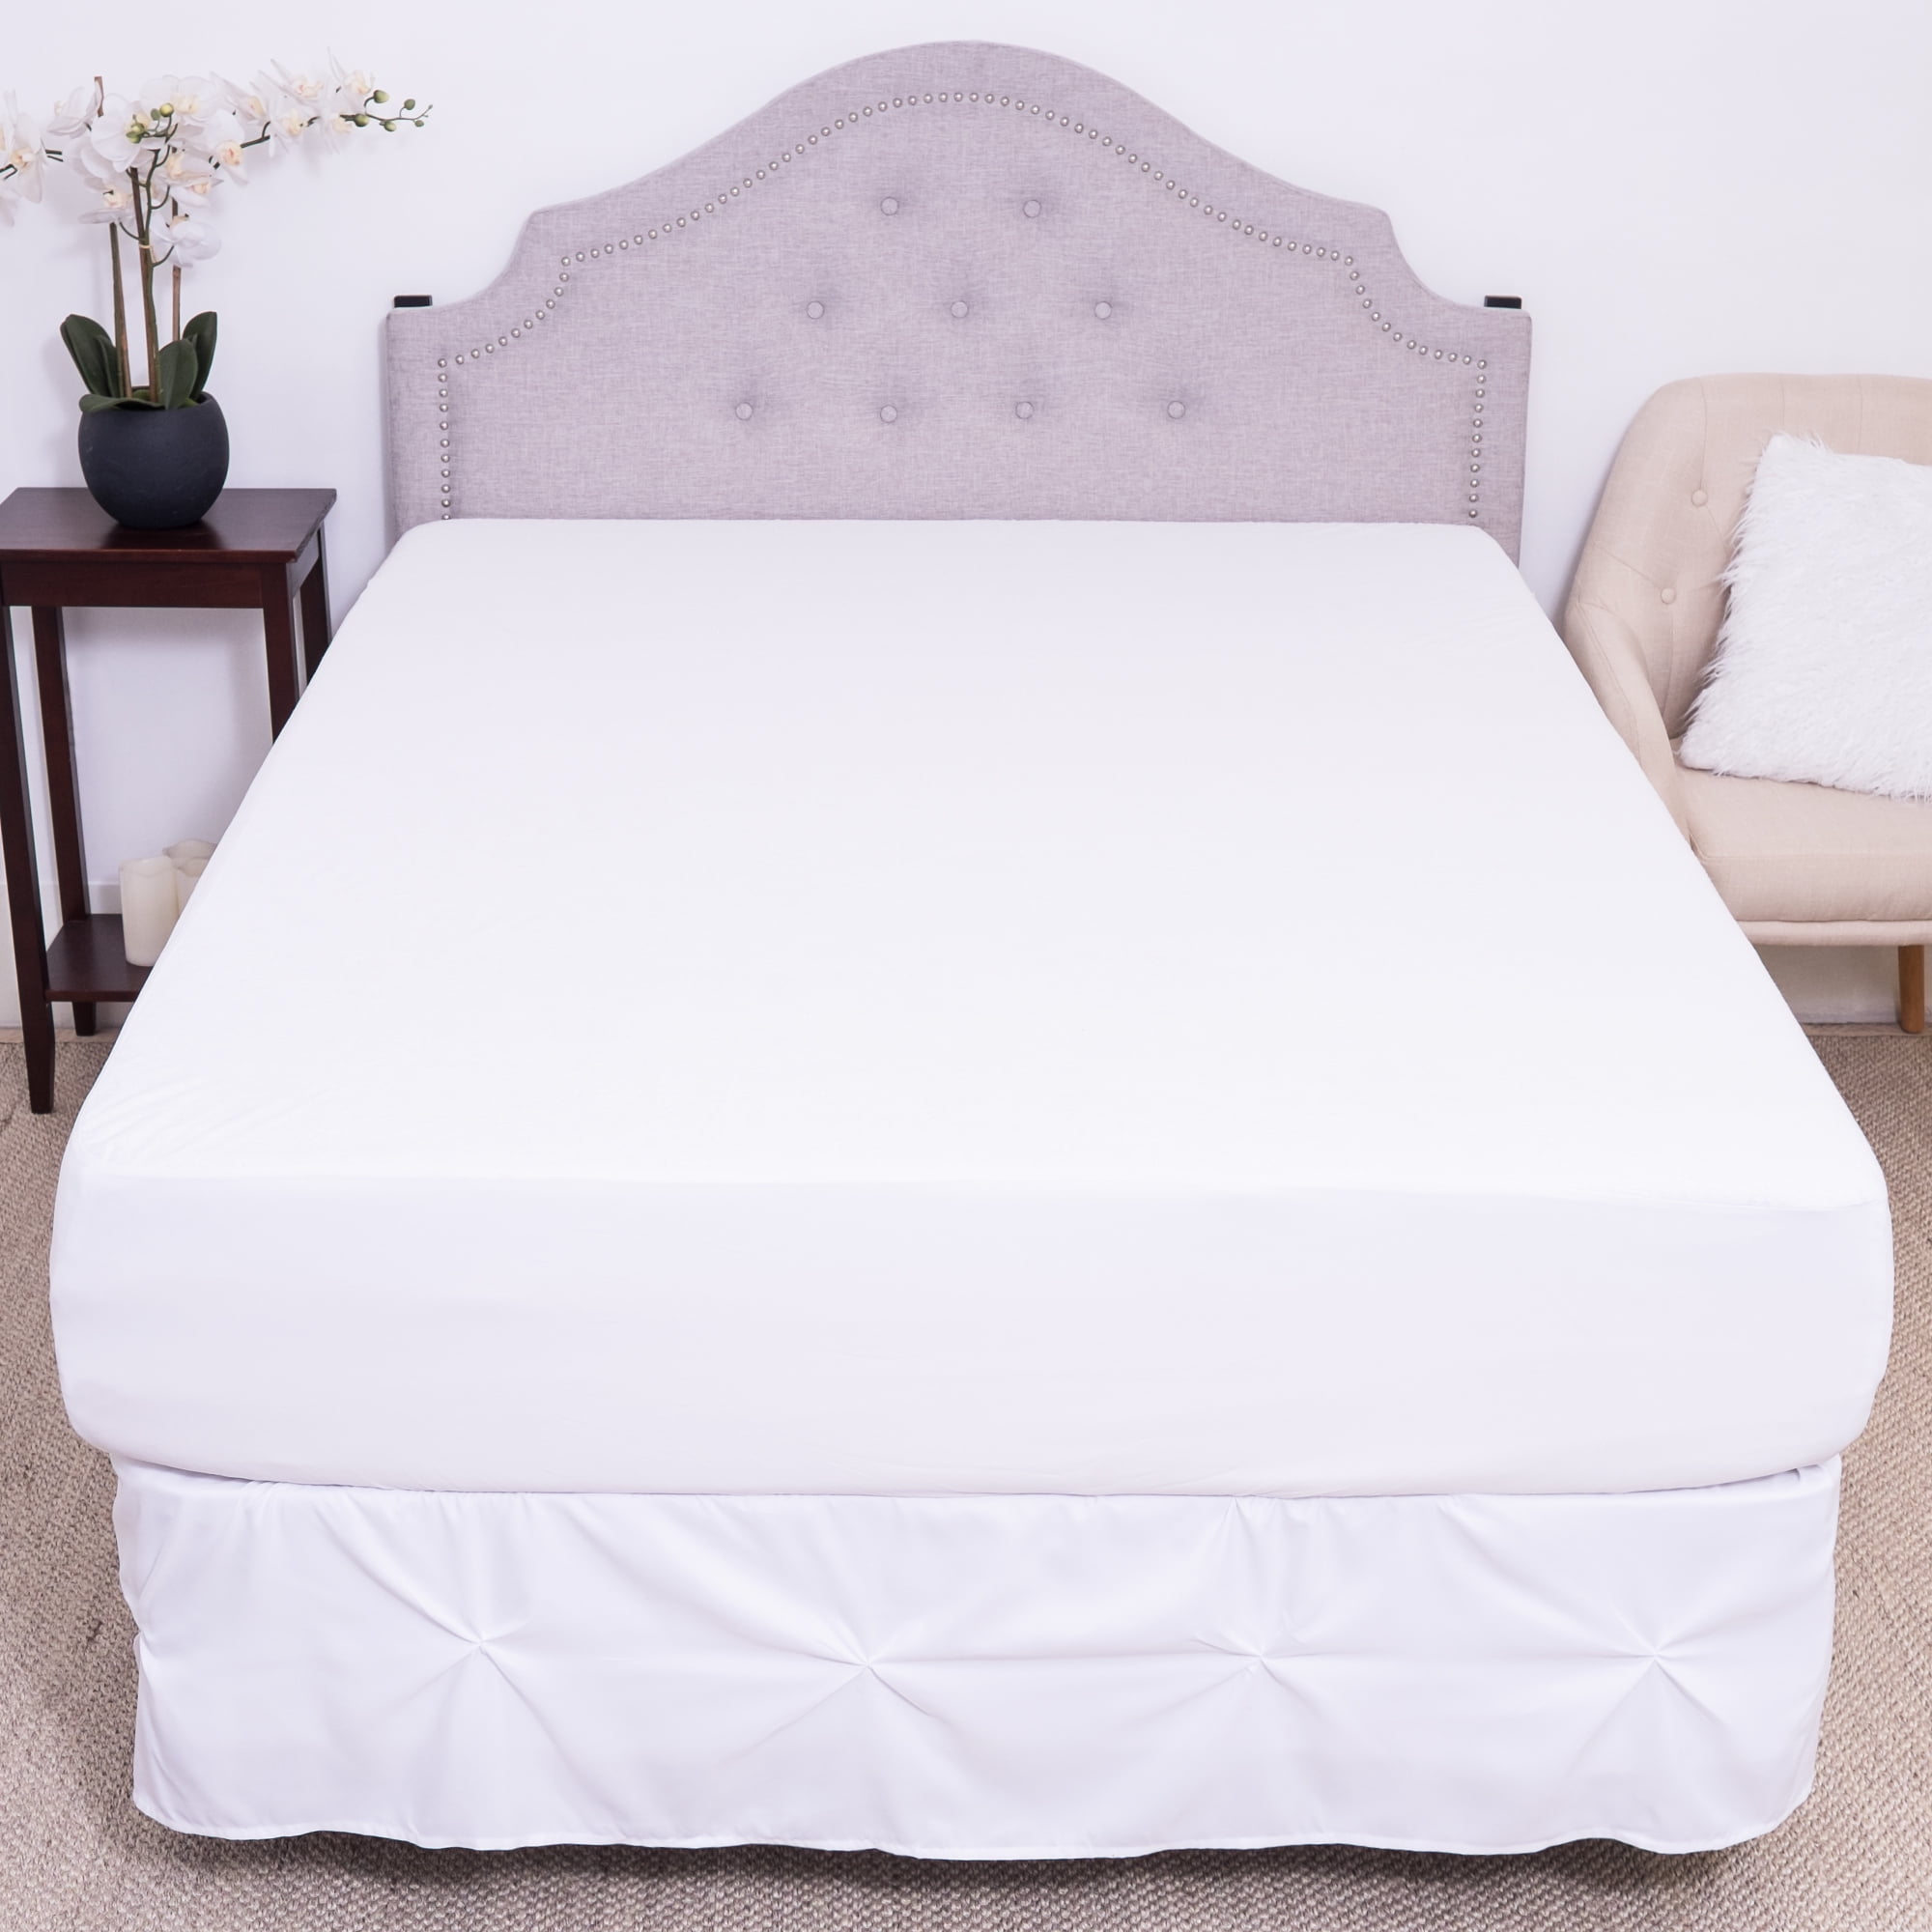 New Waterproof Terry Towel Mattress Protector Fitted Sheet Bed Cover All Sizes 